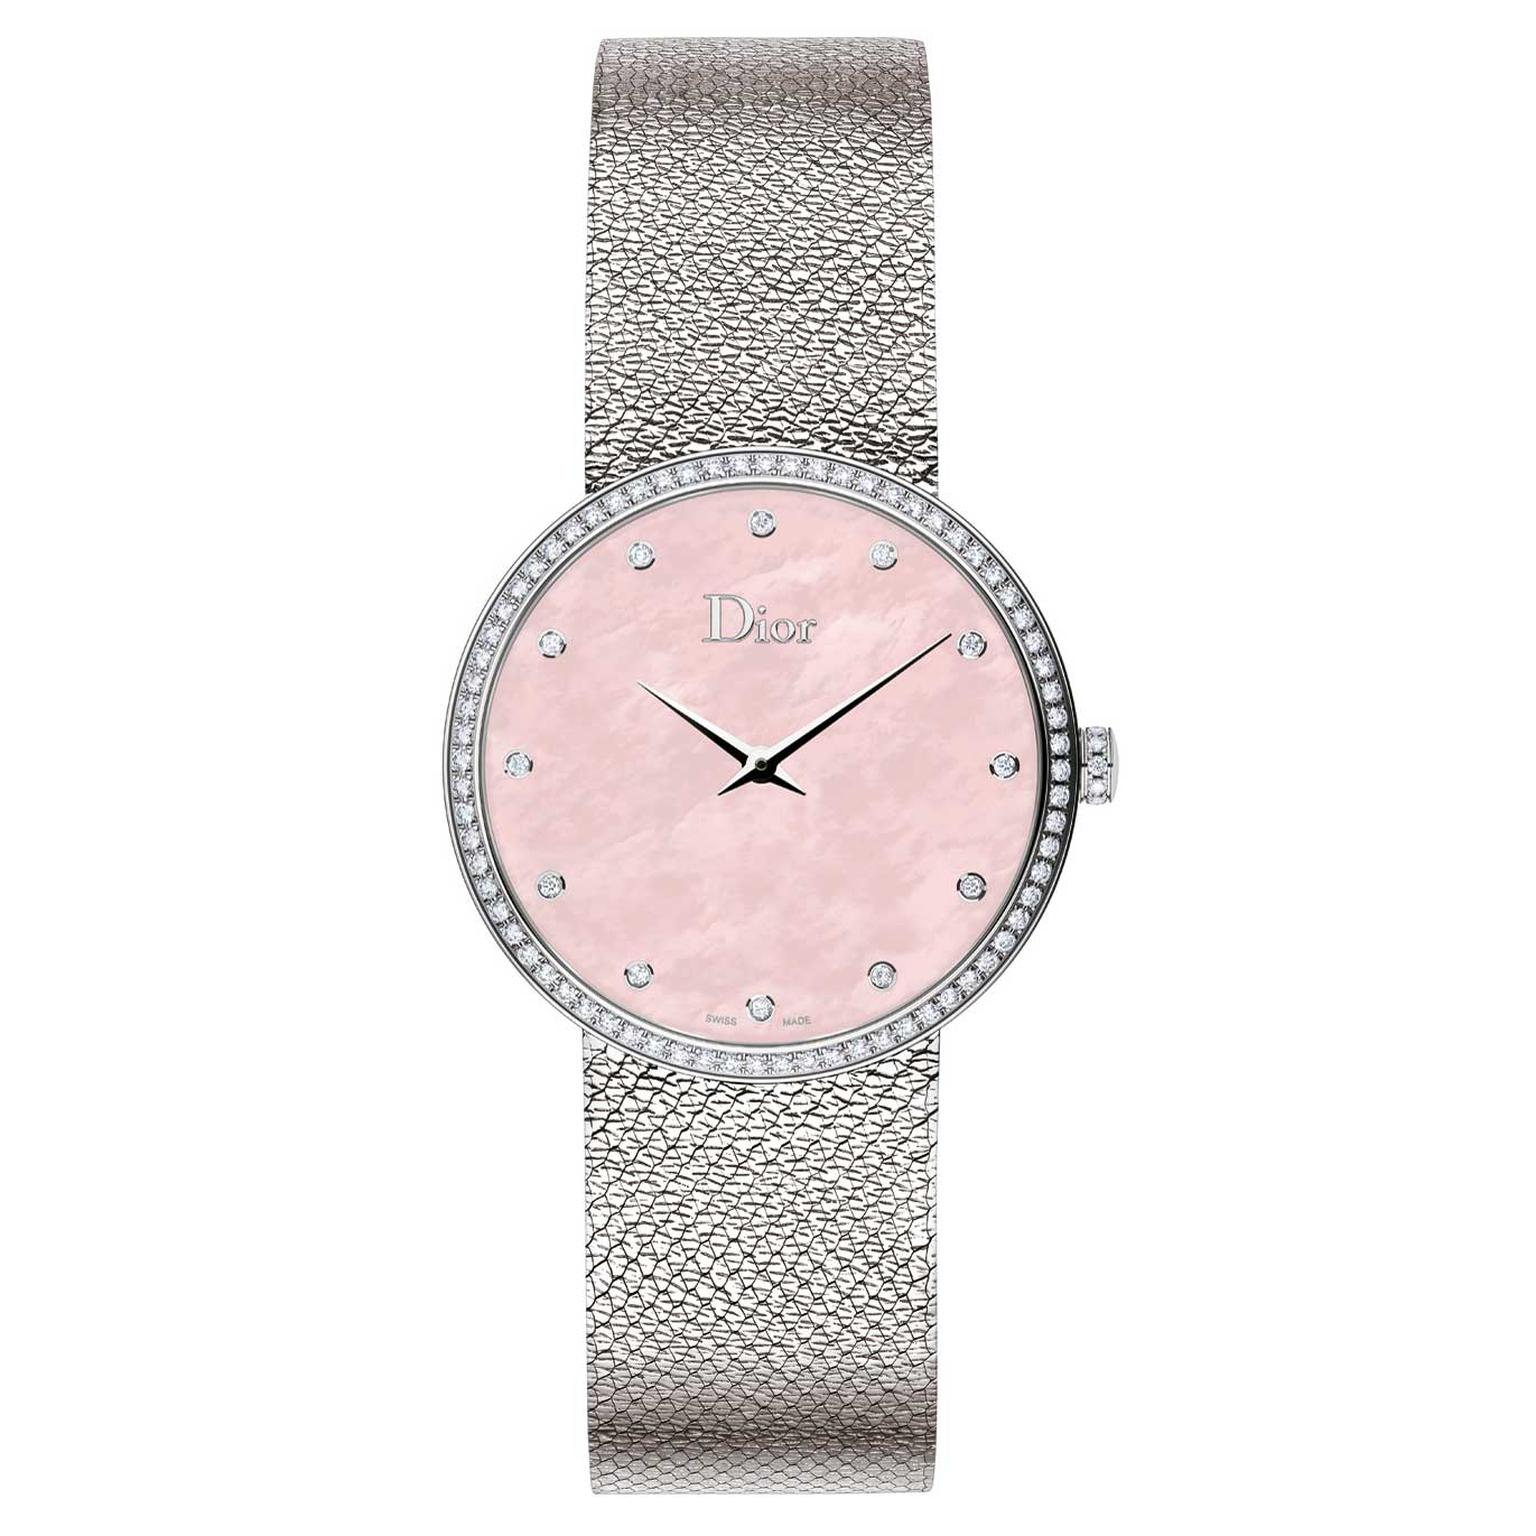 La D de Dior Satine watch with a pink mother-of-pearl dial and diamonds